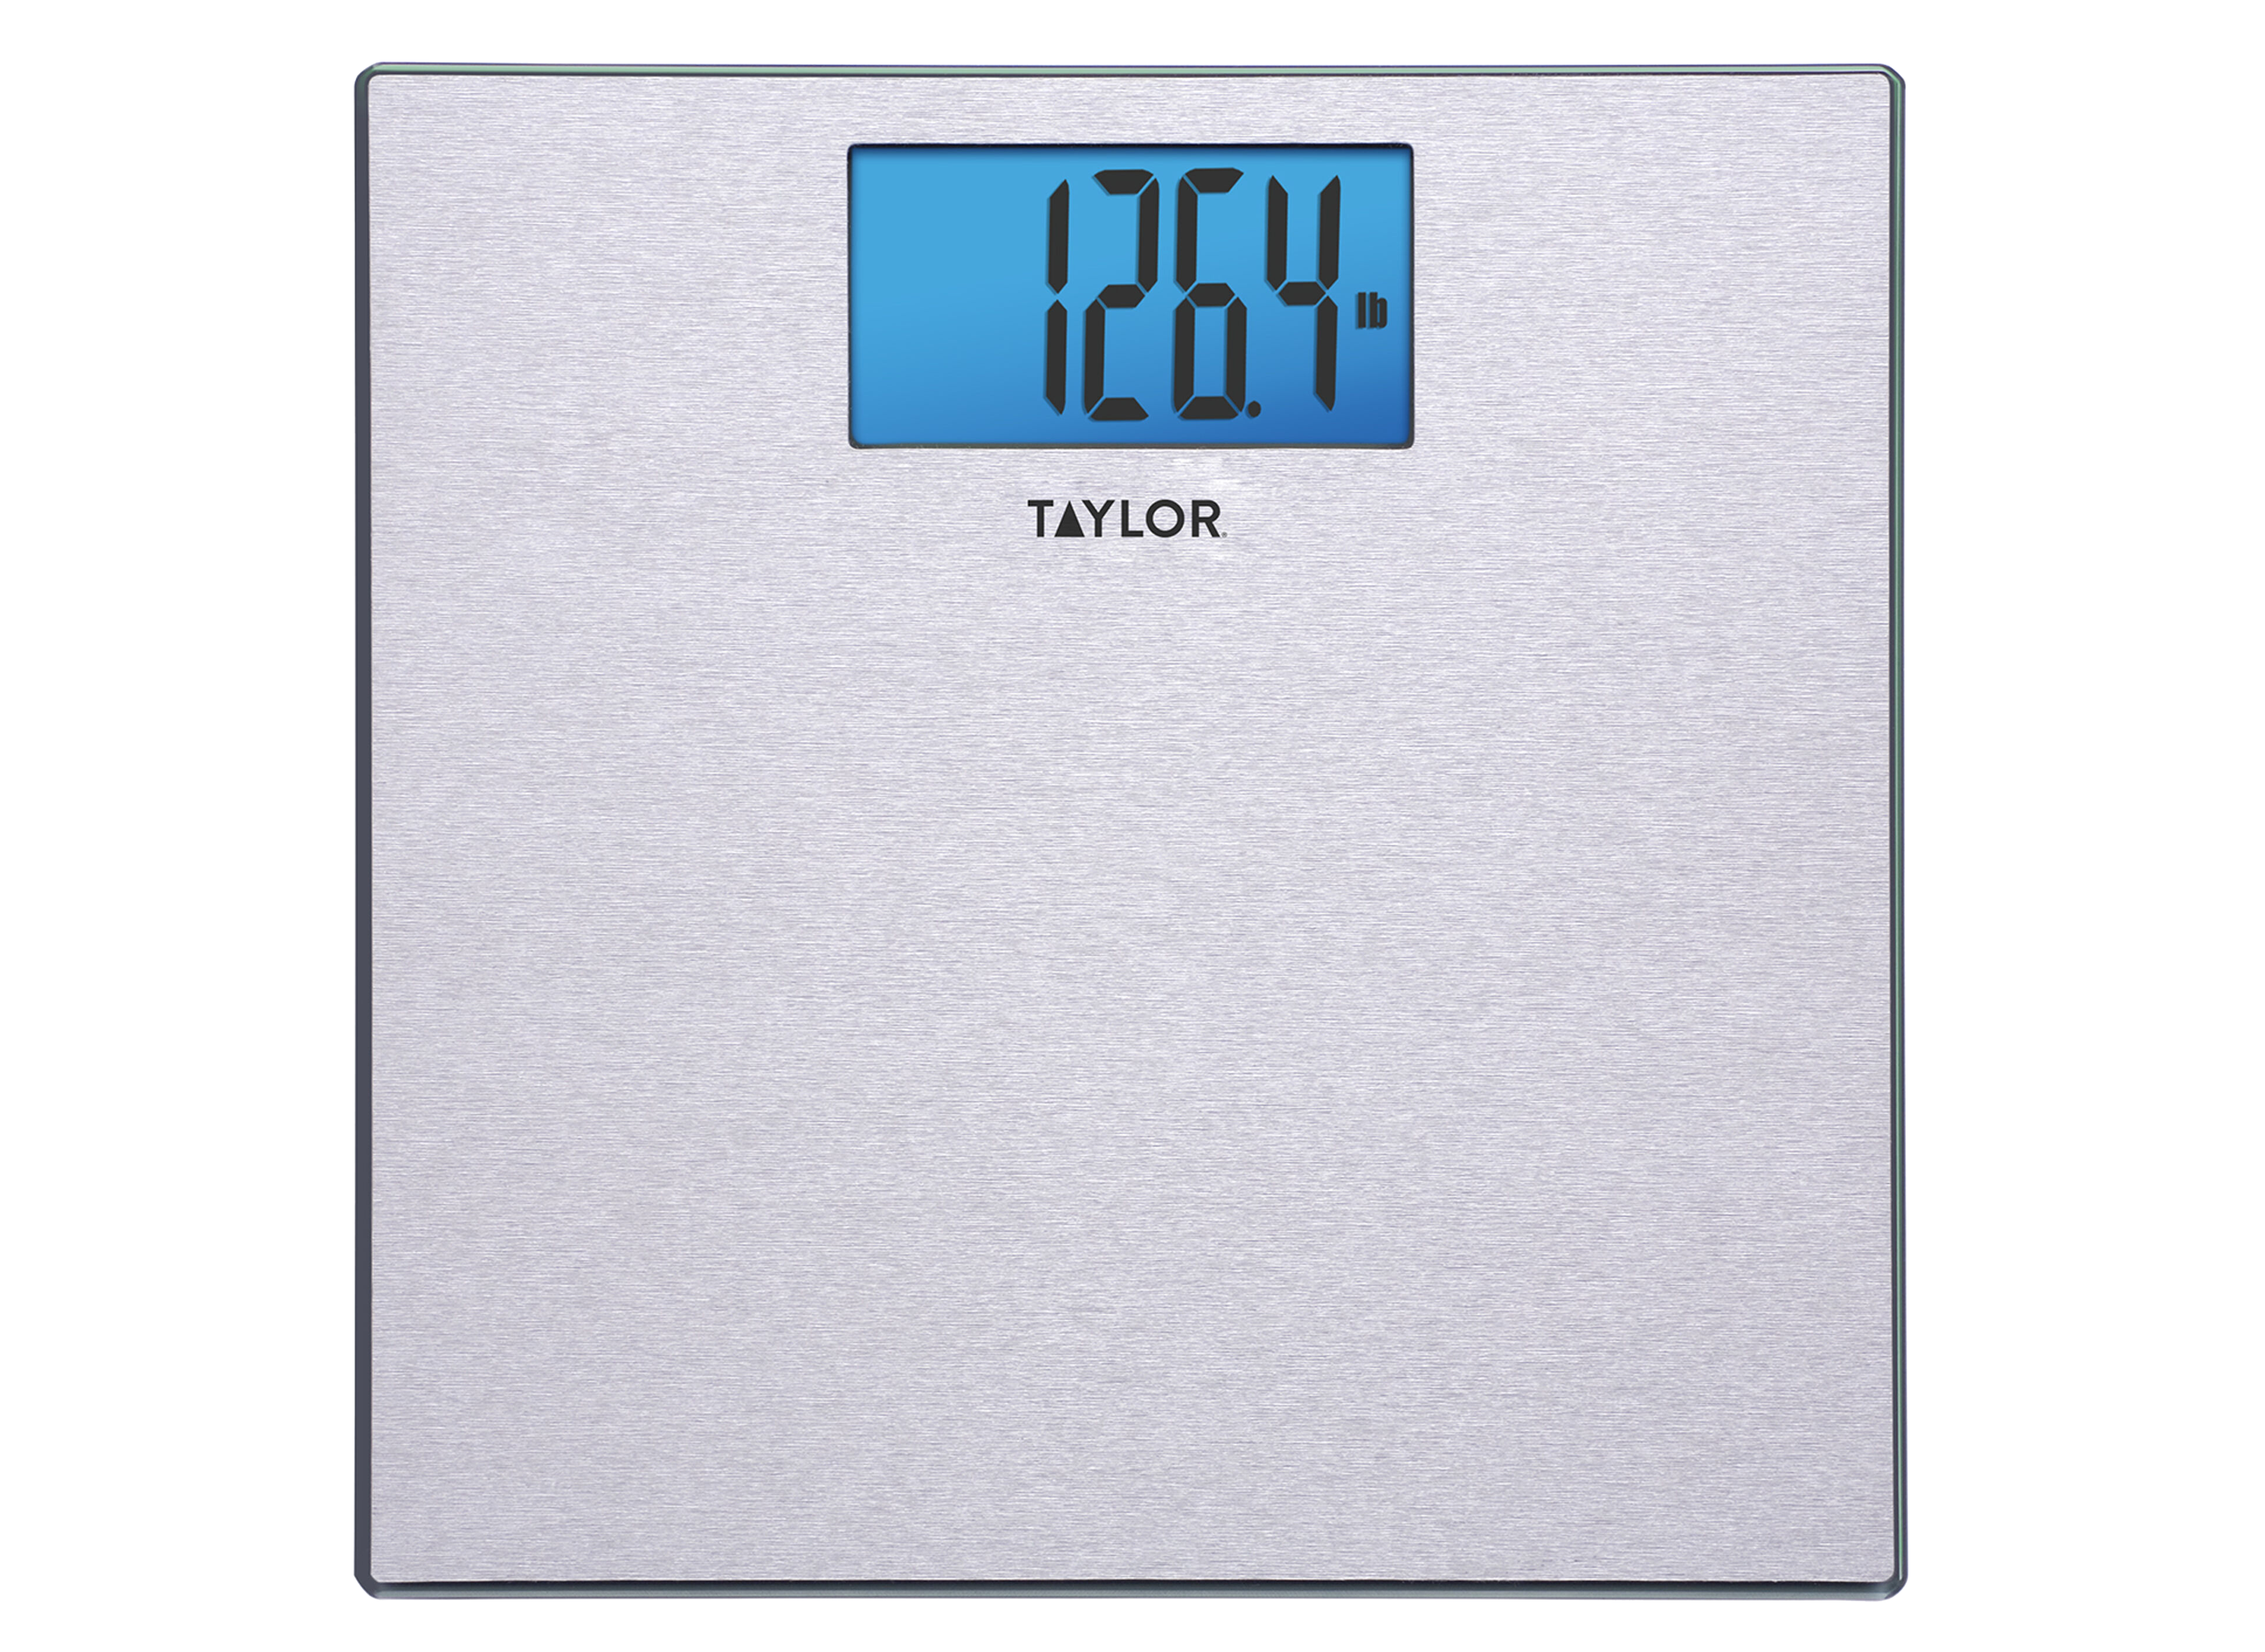 Taylor Digital Glass Chrome 7506 Bathroom Scale Review - Consumer Reports